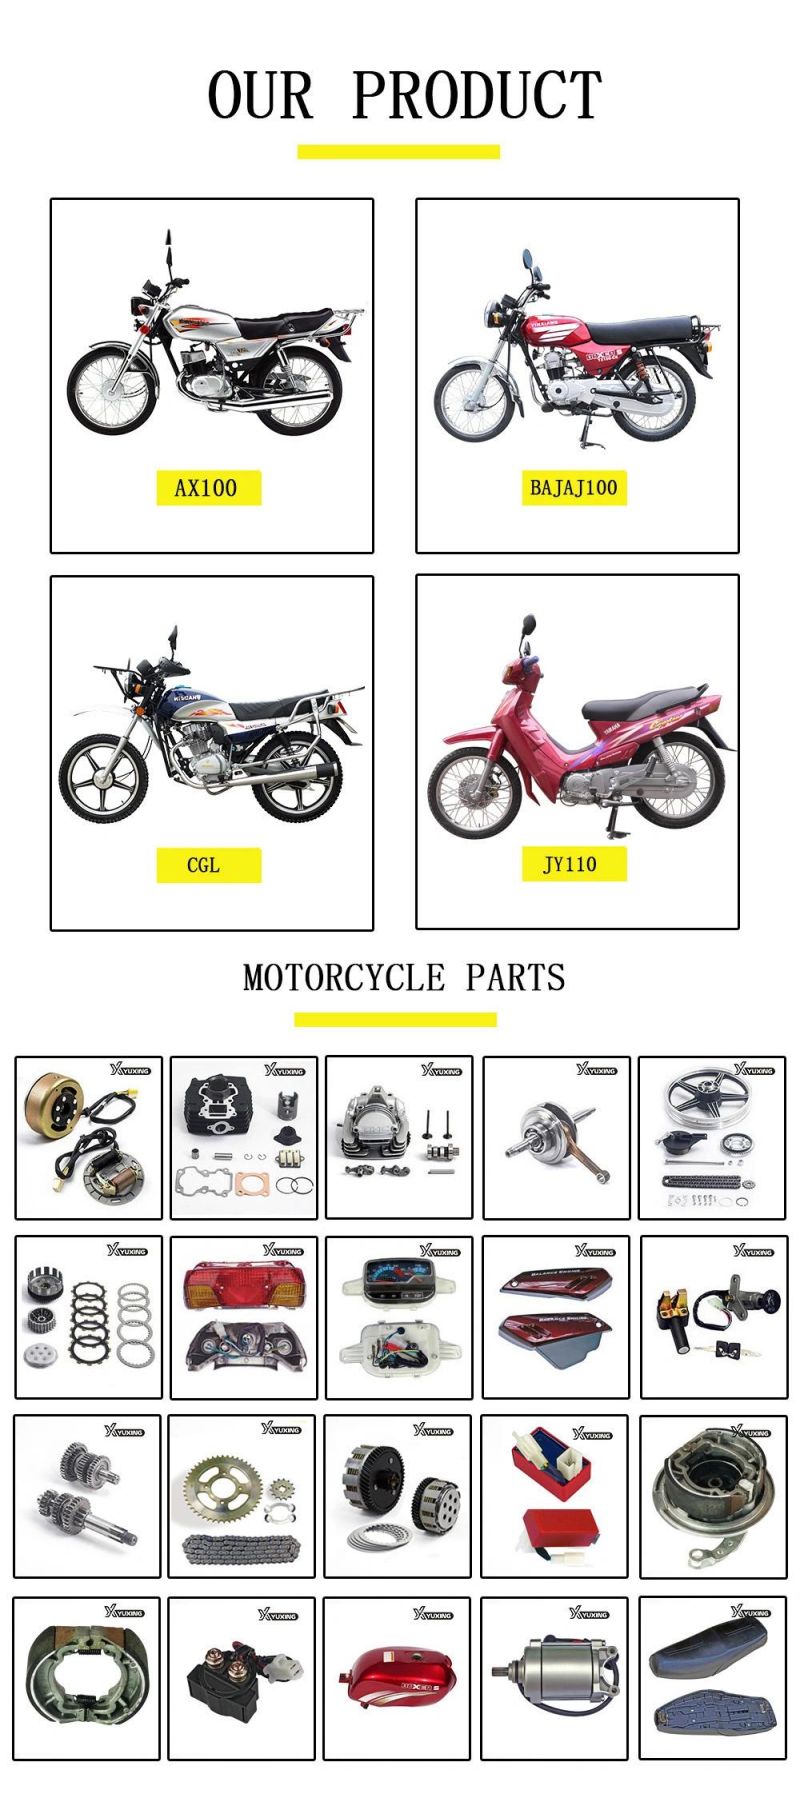 China Motorcycle Spare Parts Scooter Engine Maintenance-Free Yt4l-BS 12V4ah Rechargeable Motorcycle Battery for Motorbike